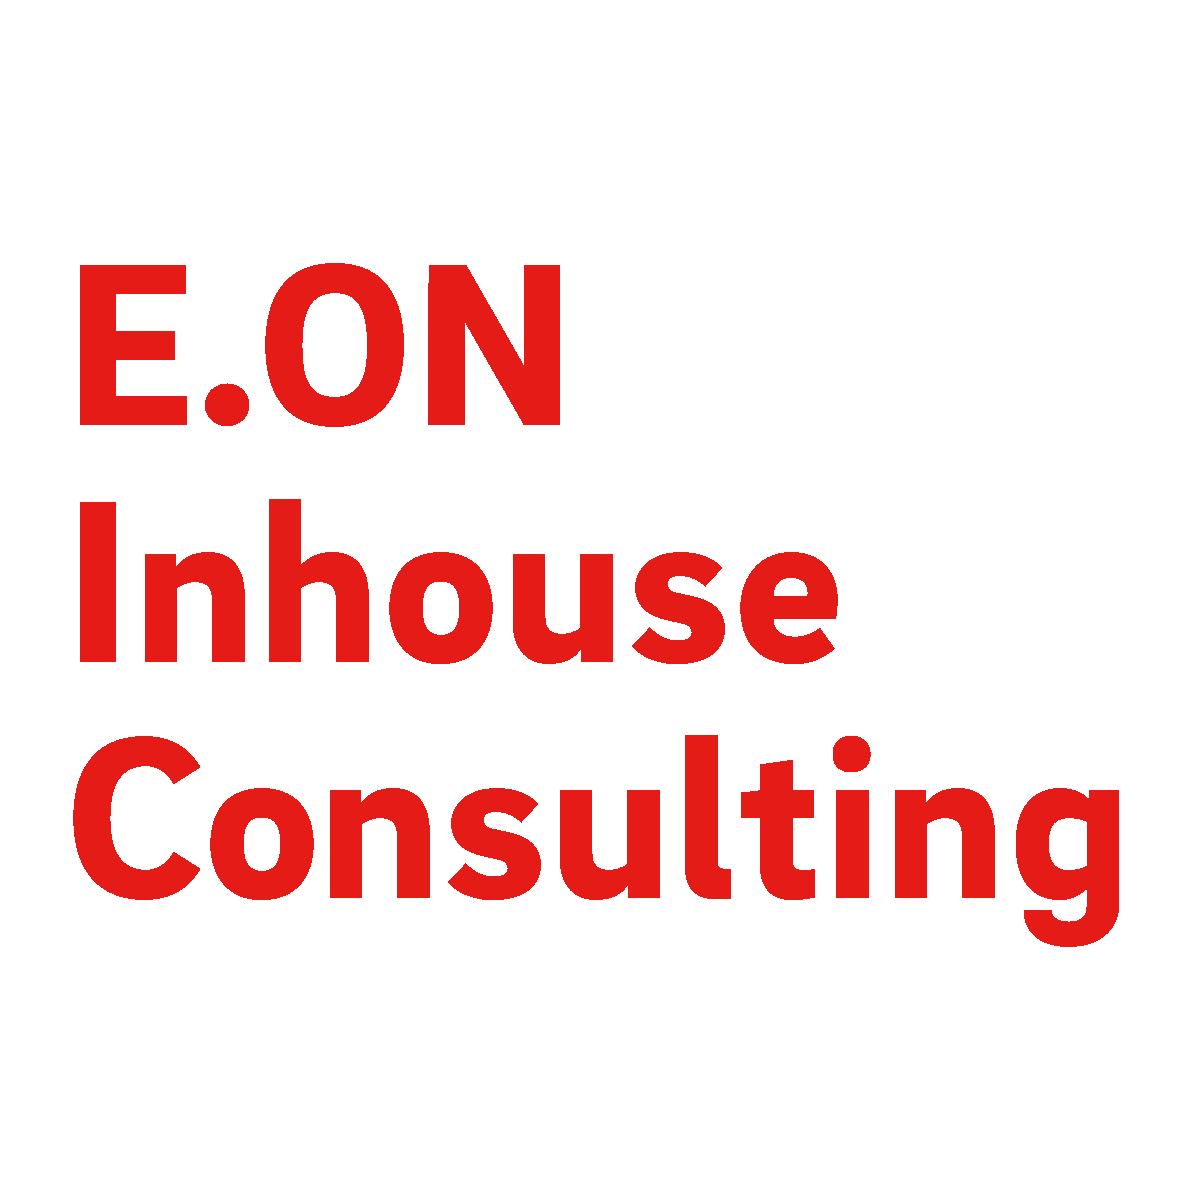 e.on inhouse consulting